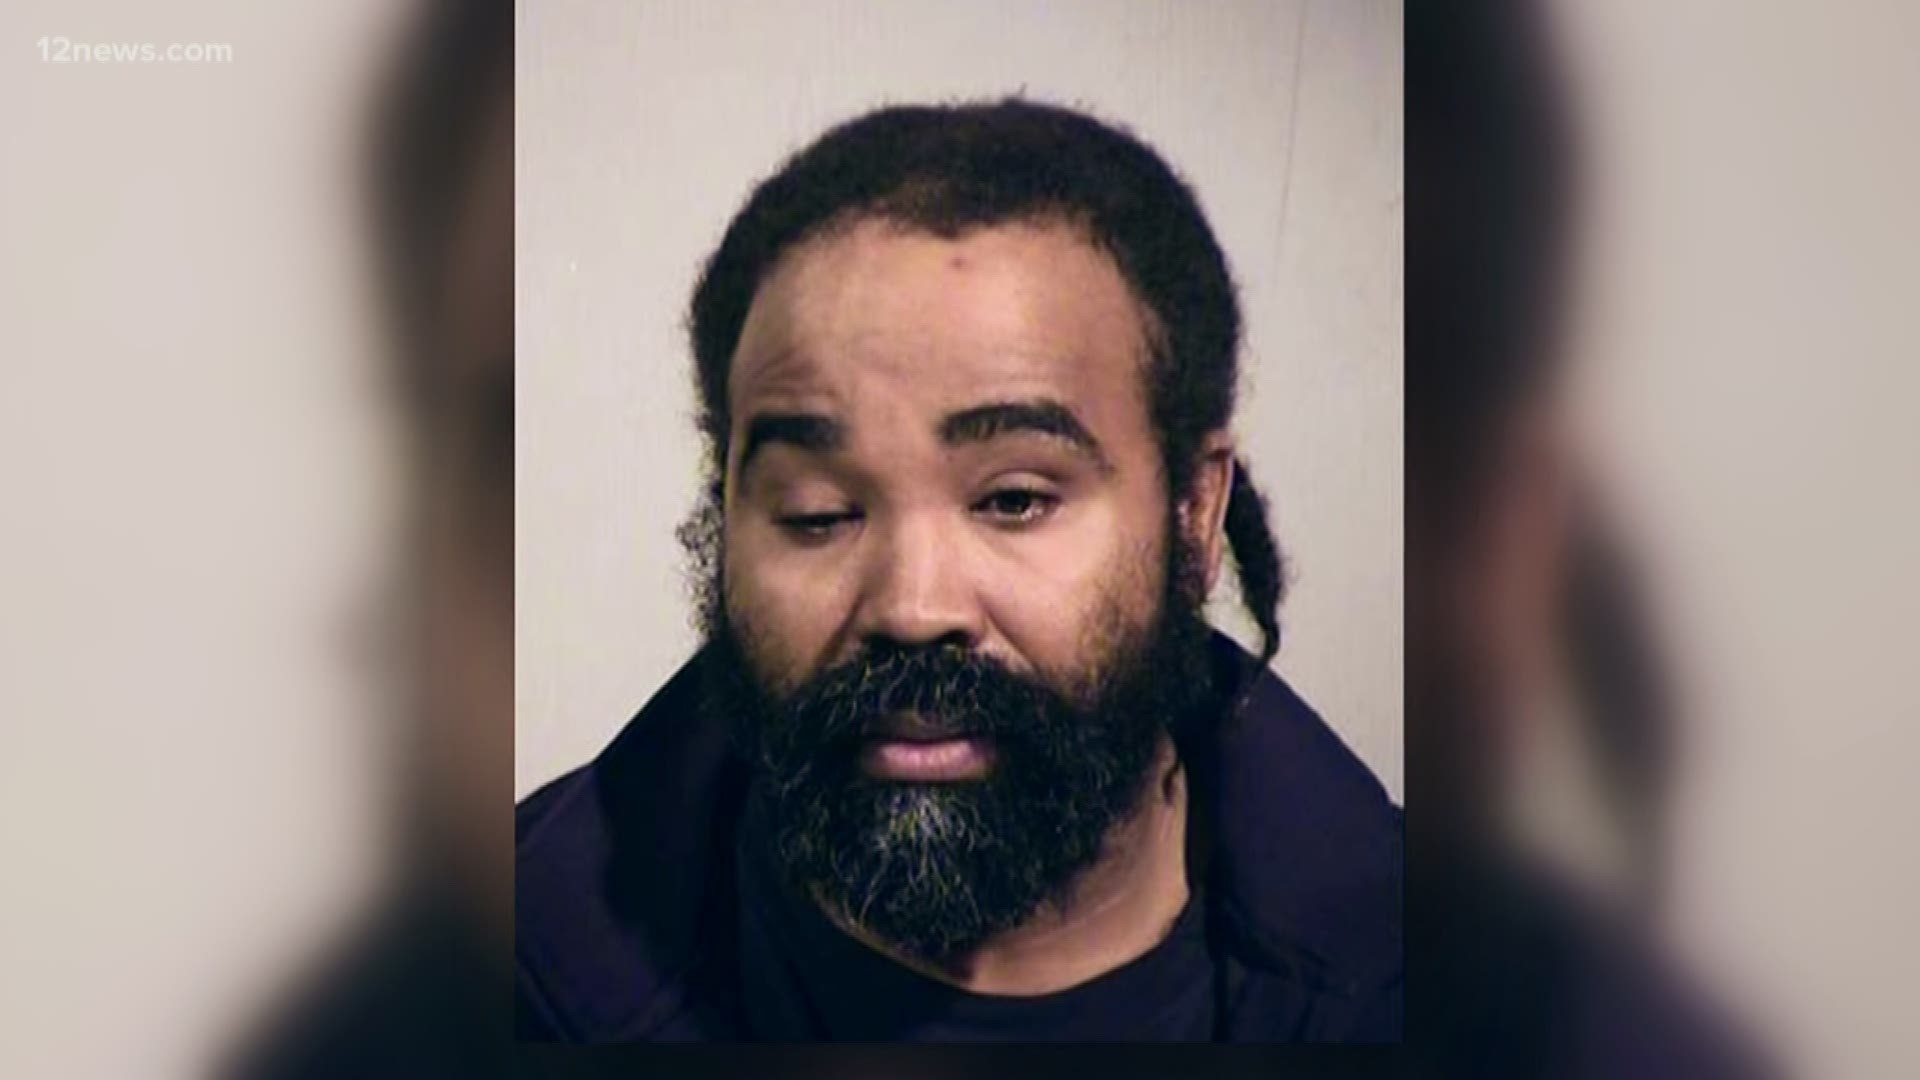 Nathan Sutherland was a nurse at Hacienda Healthcare, but who he is outside of his job? 12 News digs into the background of the man accused of raping and impregnating a woman with severe intellectual disabilities at the facility.